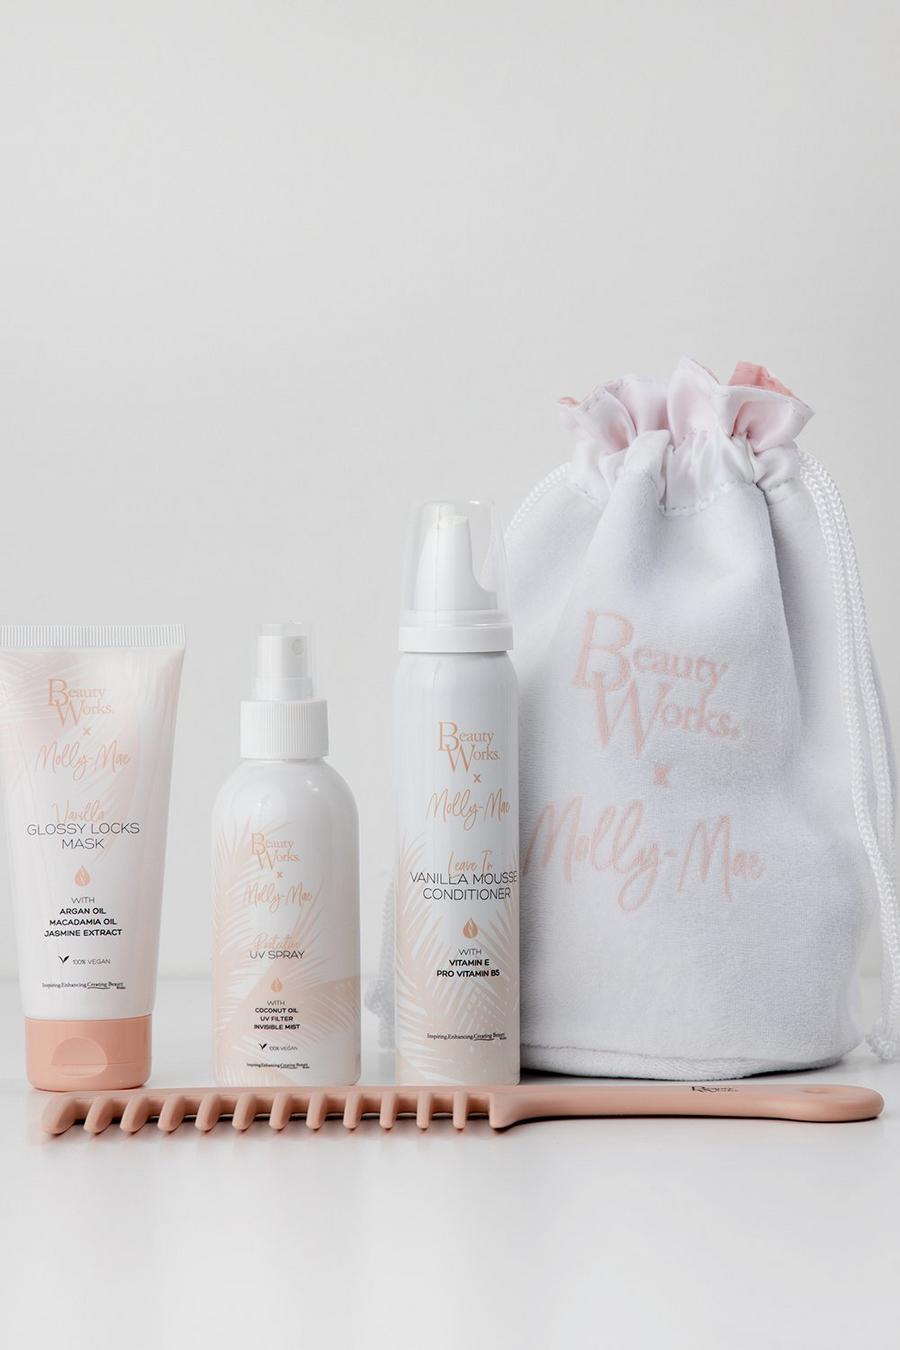 Beauty Works x Molly Mae Kit per ricci lucenti, Baby pink rosa